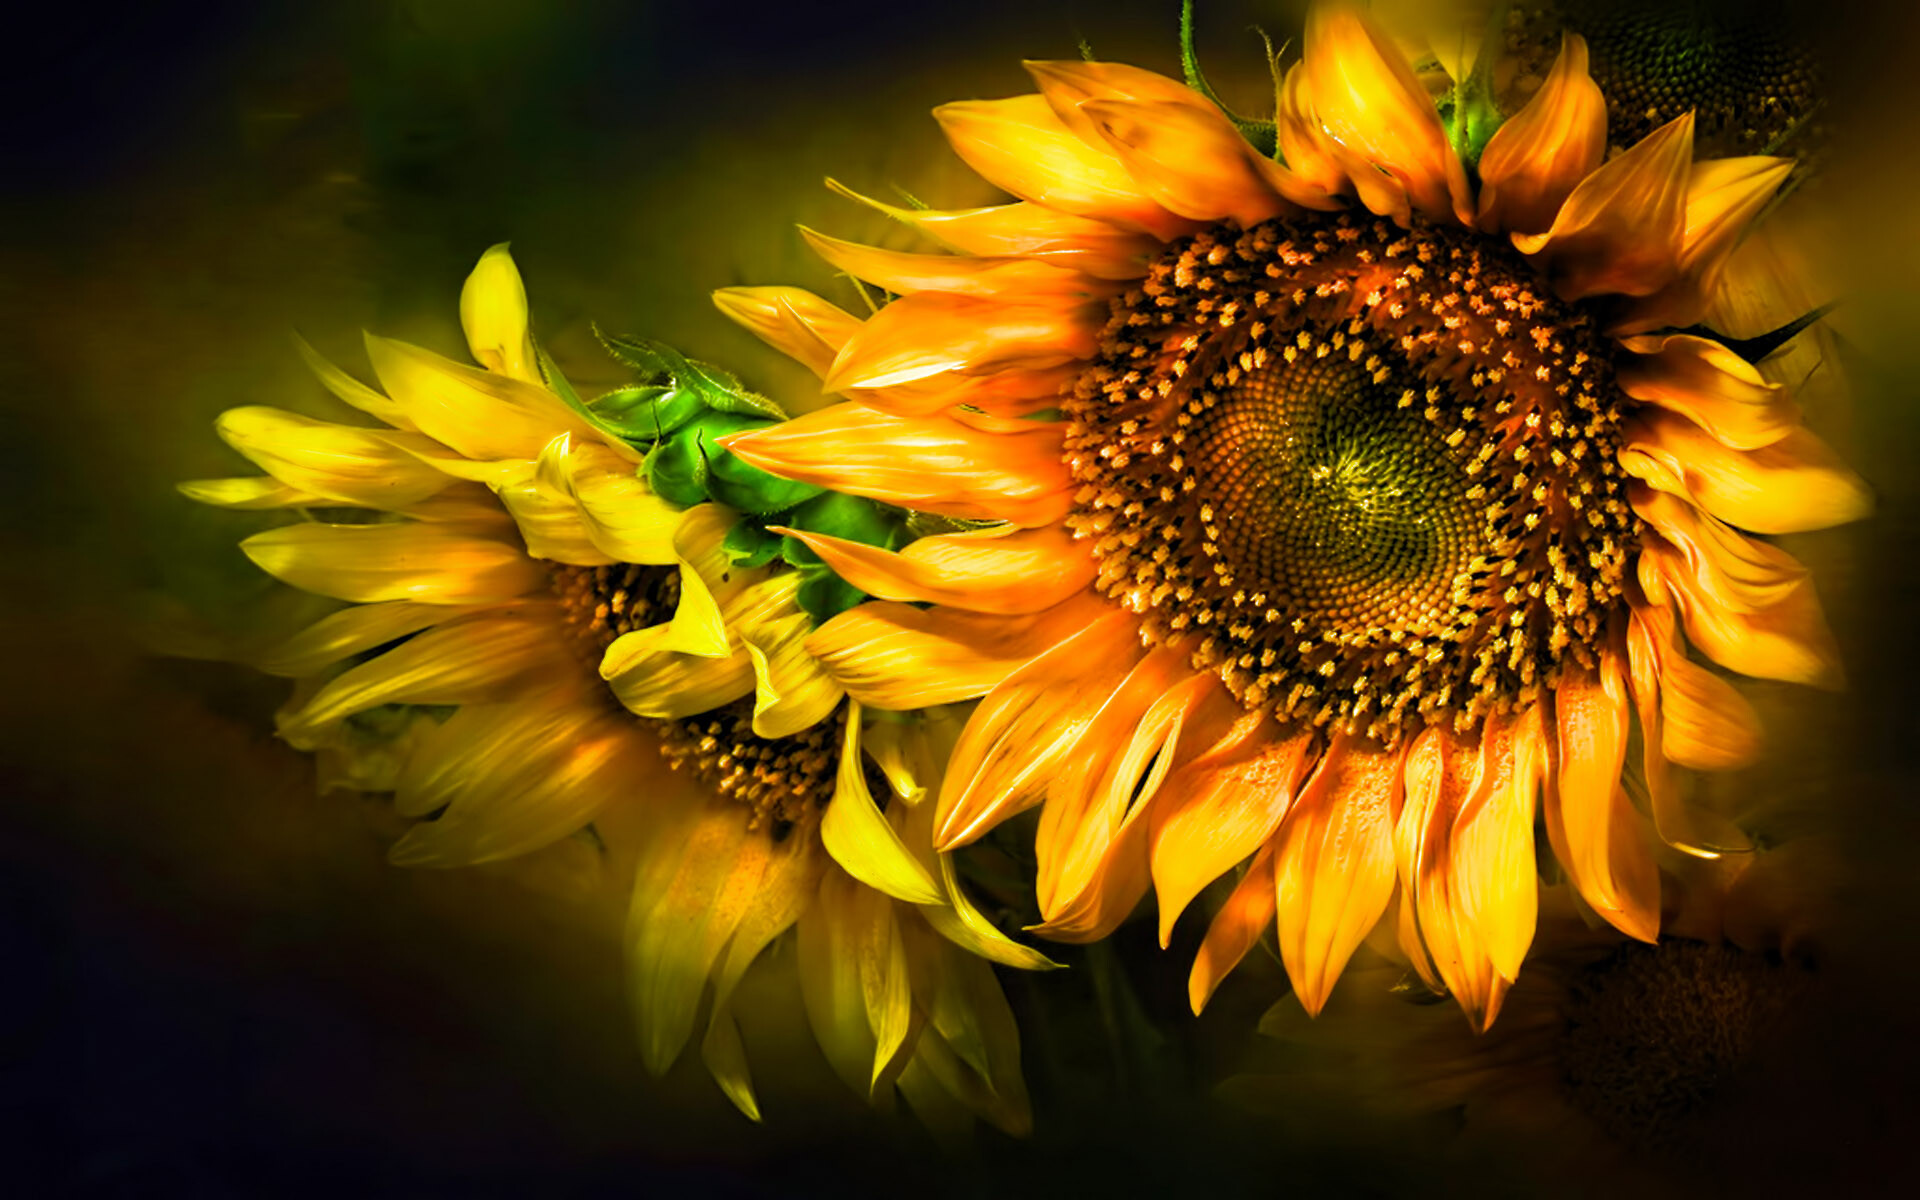 Sunflower: The oil, extracted from the flower's seeds, is used for cooking, as a carrier oil, and to produce margarine and biodiesel, as it is cheaper than olive oil. 1920x1200 HD Background.